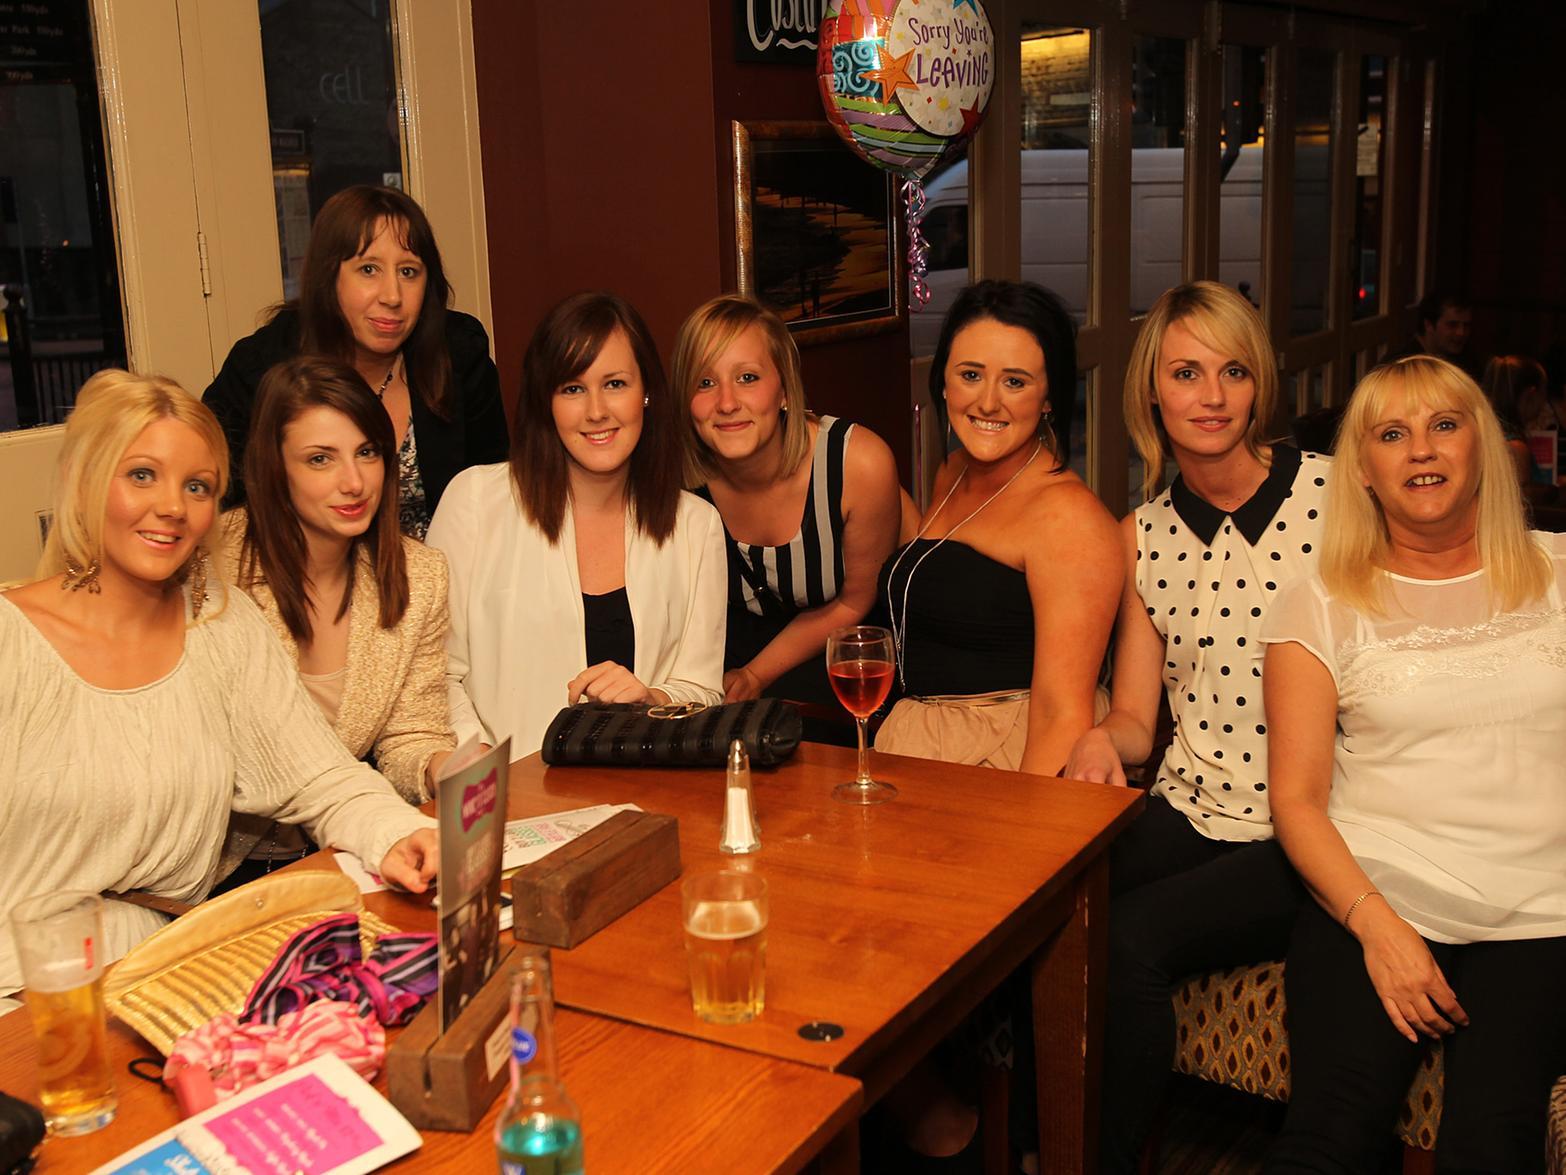 Back in 2012, Kimberley, Holly, Janet, Lowra, Vivienne, Megan, Adele and Twig enjoyed a night on the town.